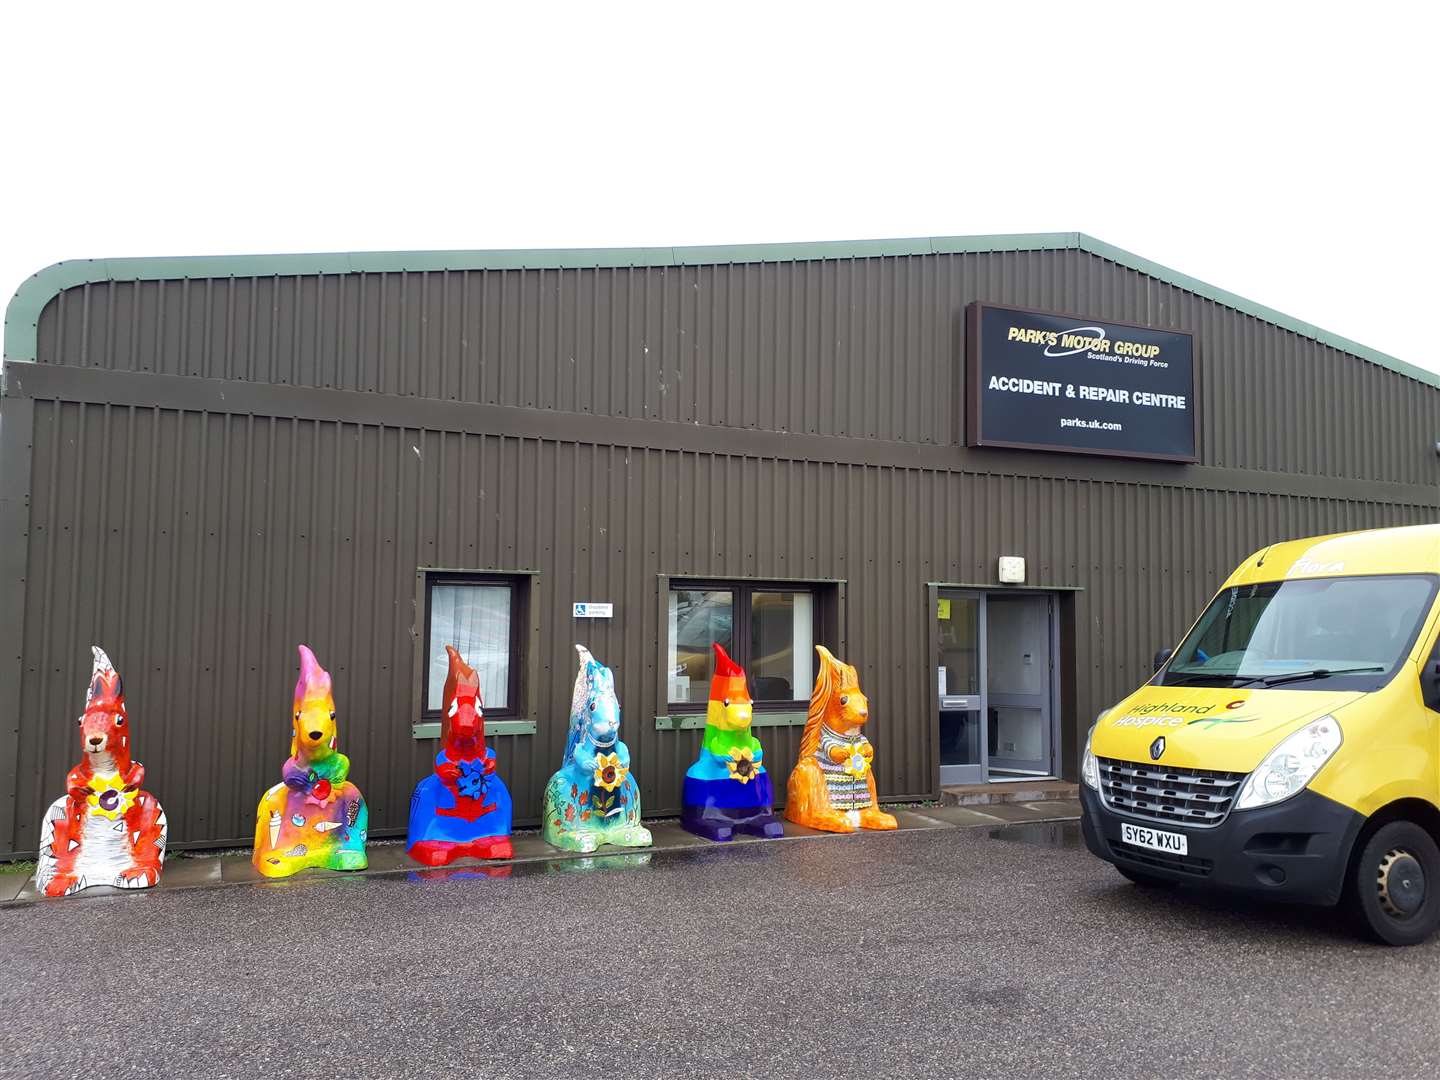 Parks Motor Group have been helping with weather protection for the squirrels.